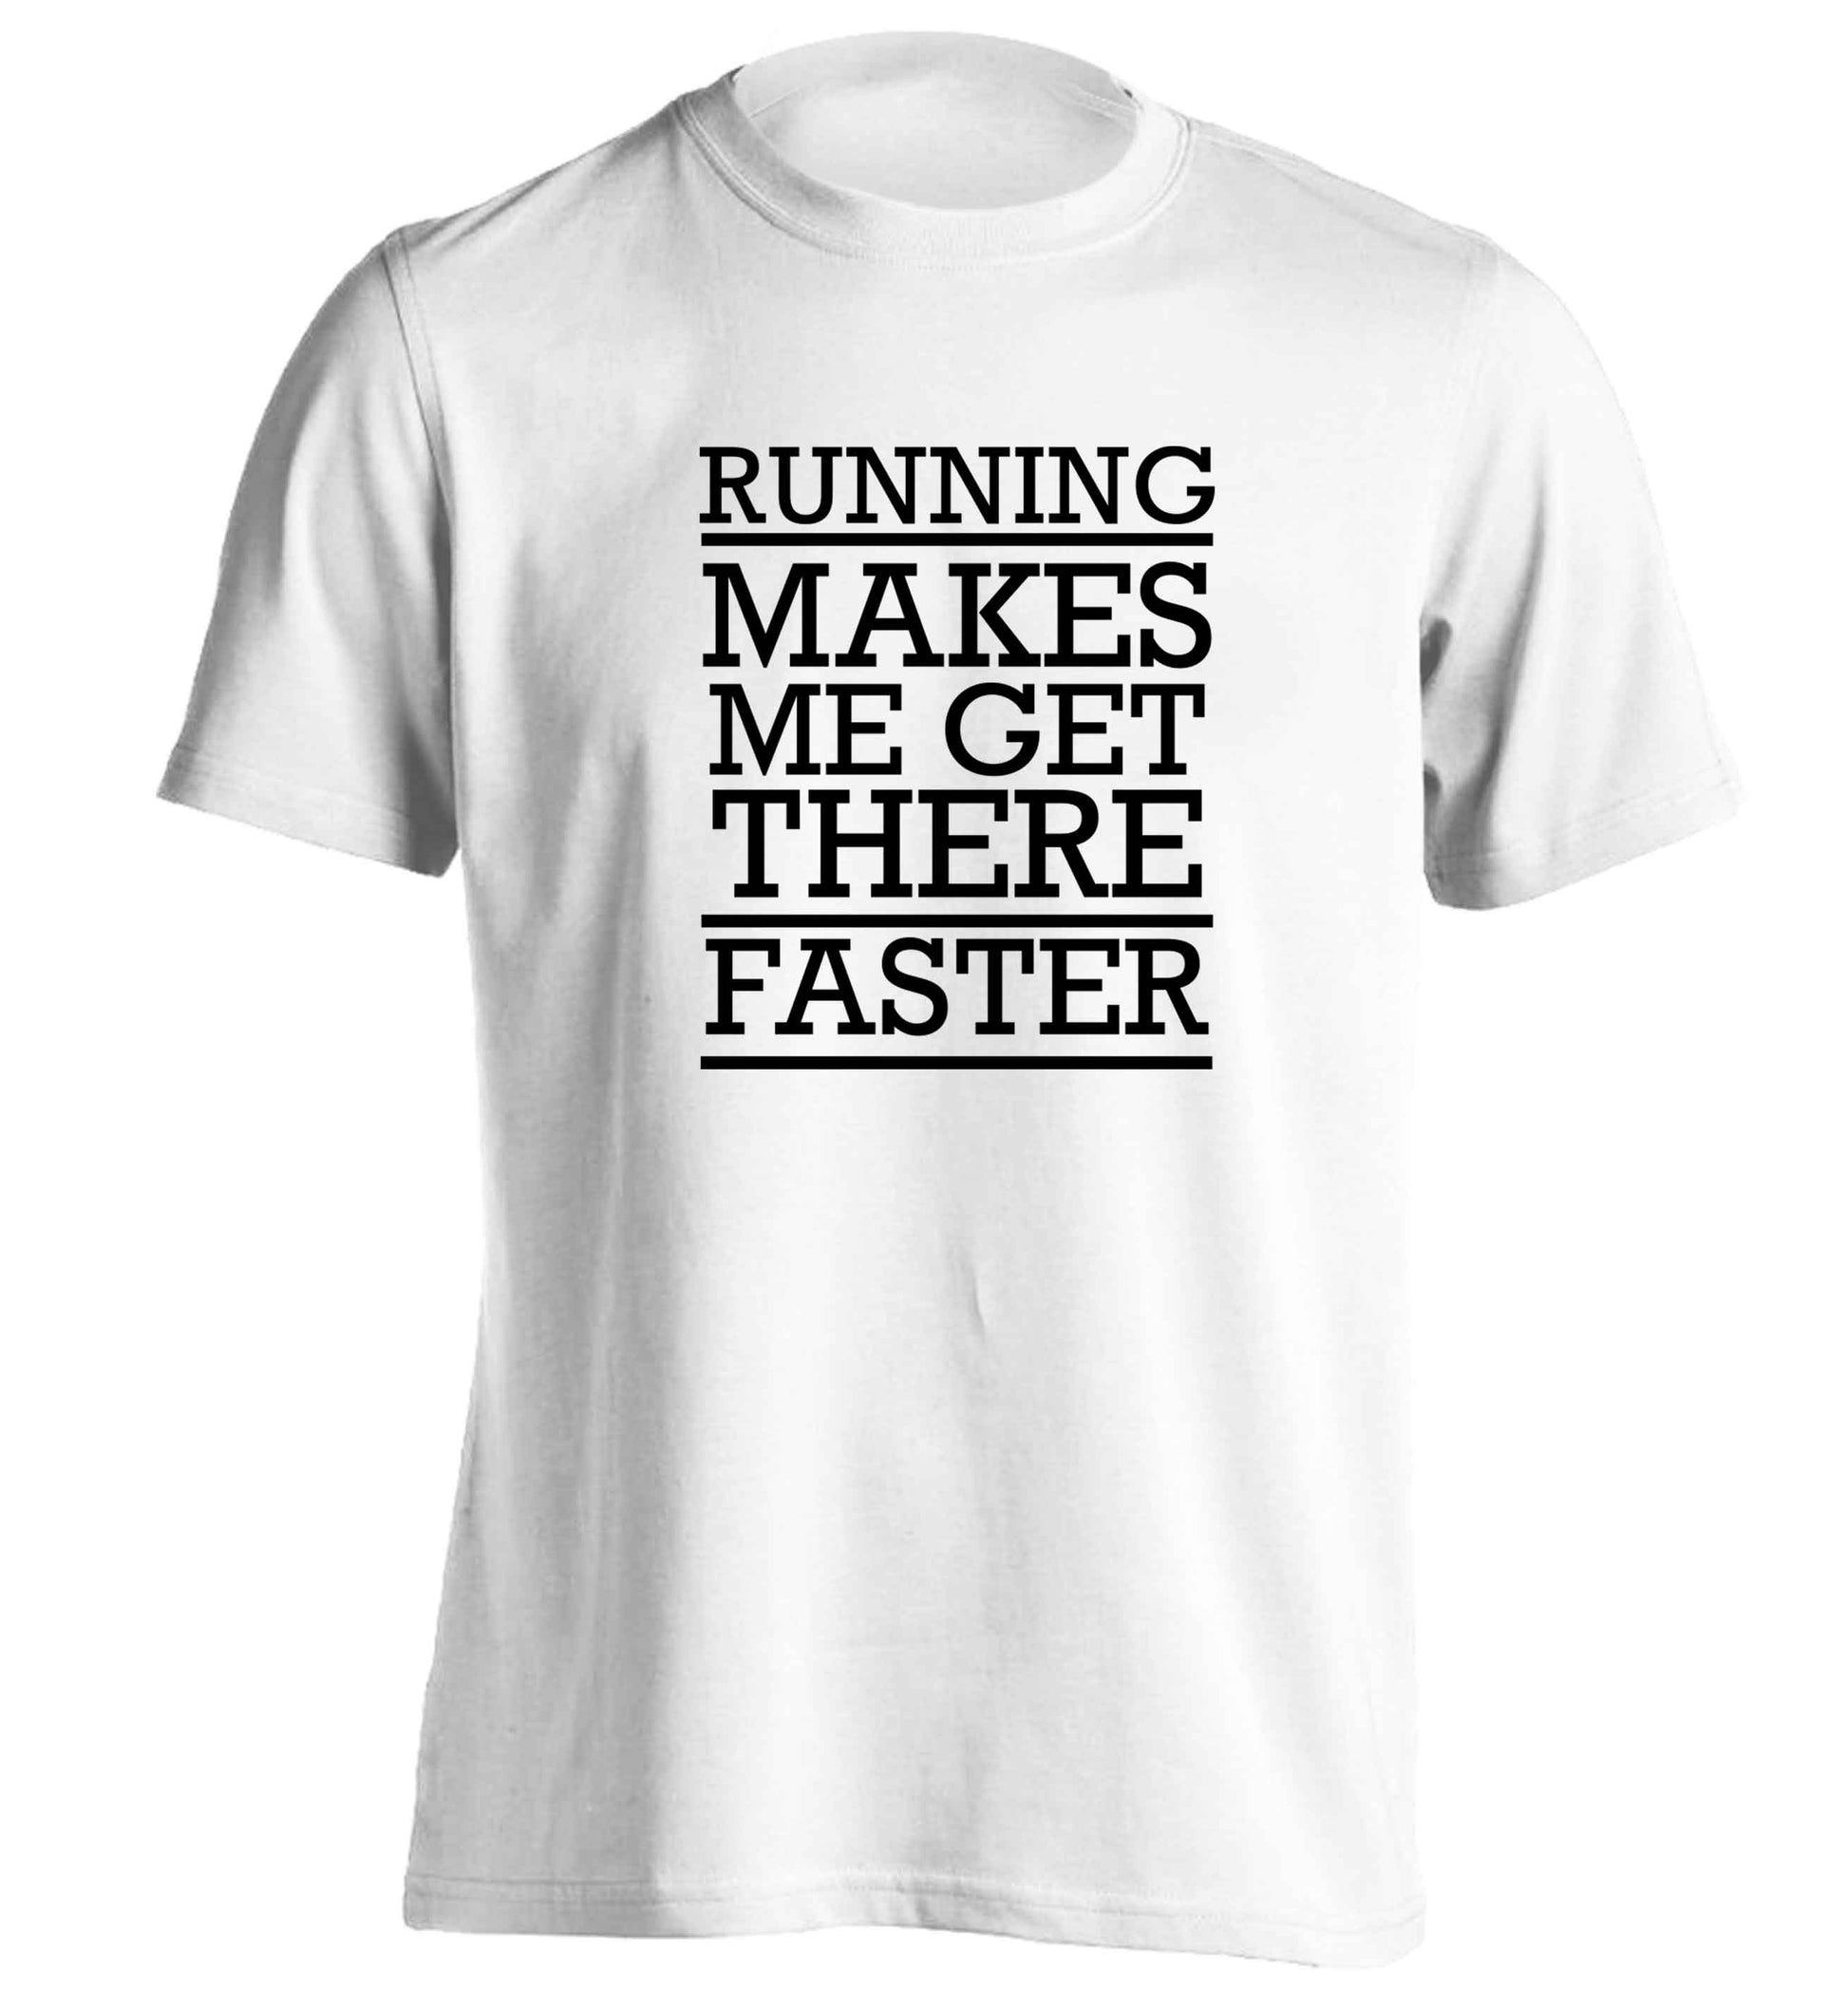 Running makes me get there faster adults unisex white Tshirt 2XL